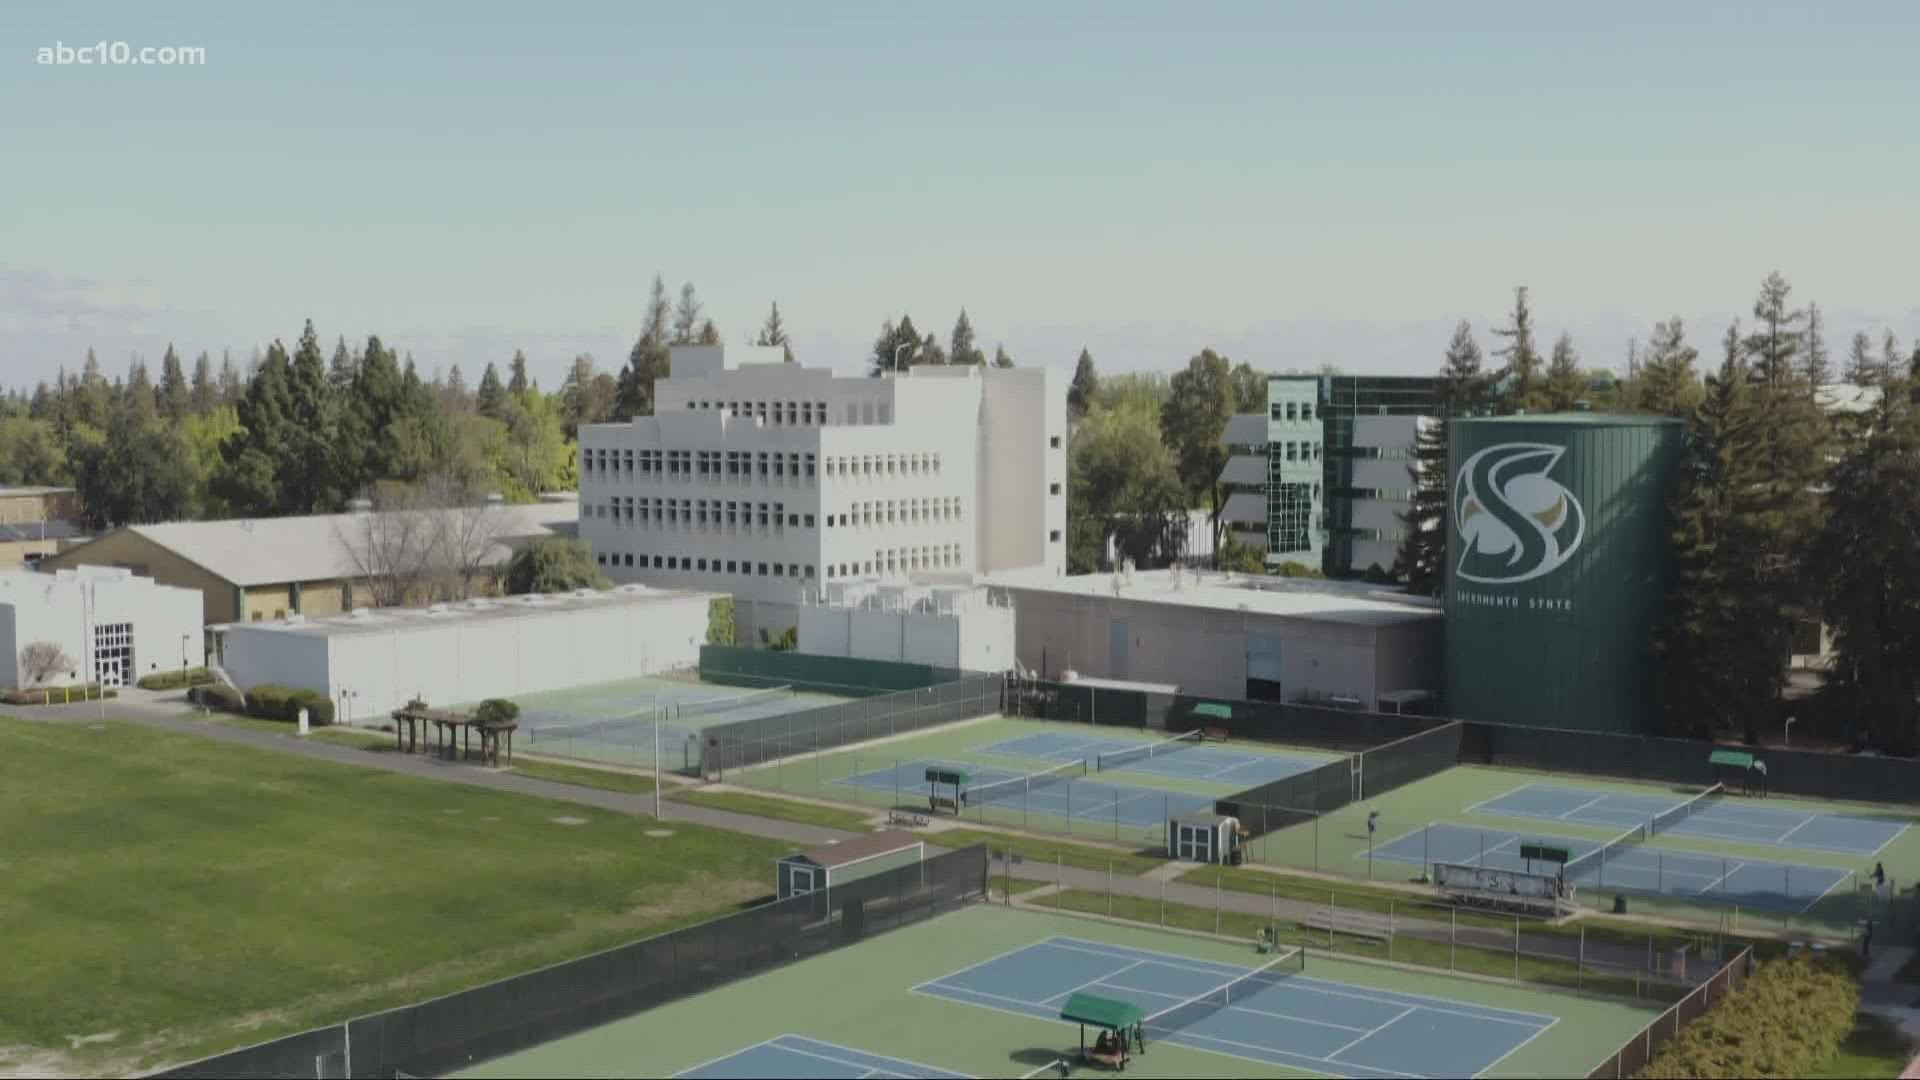 Sac State said in a press release, "we are at a stage where we can safely return to campus."